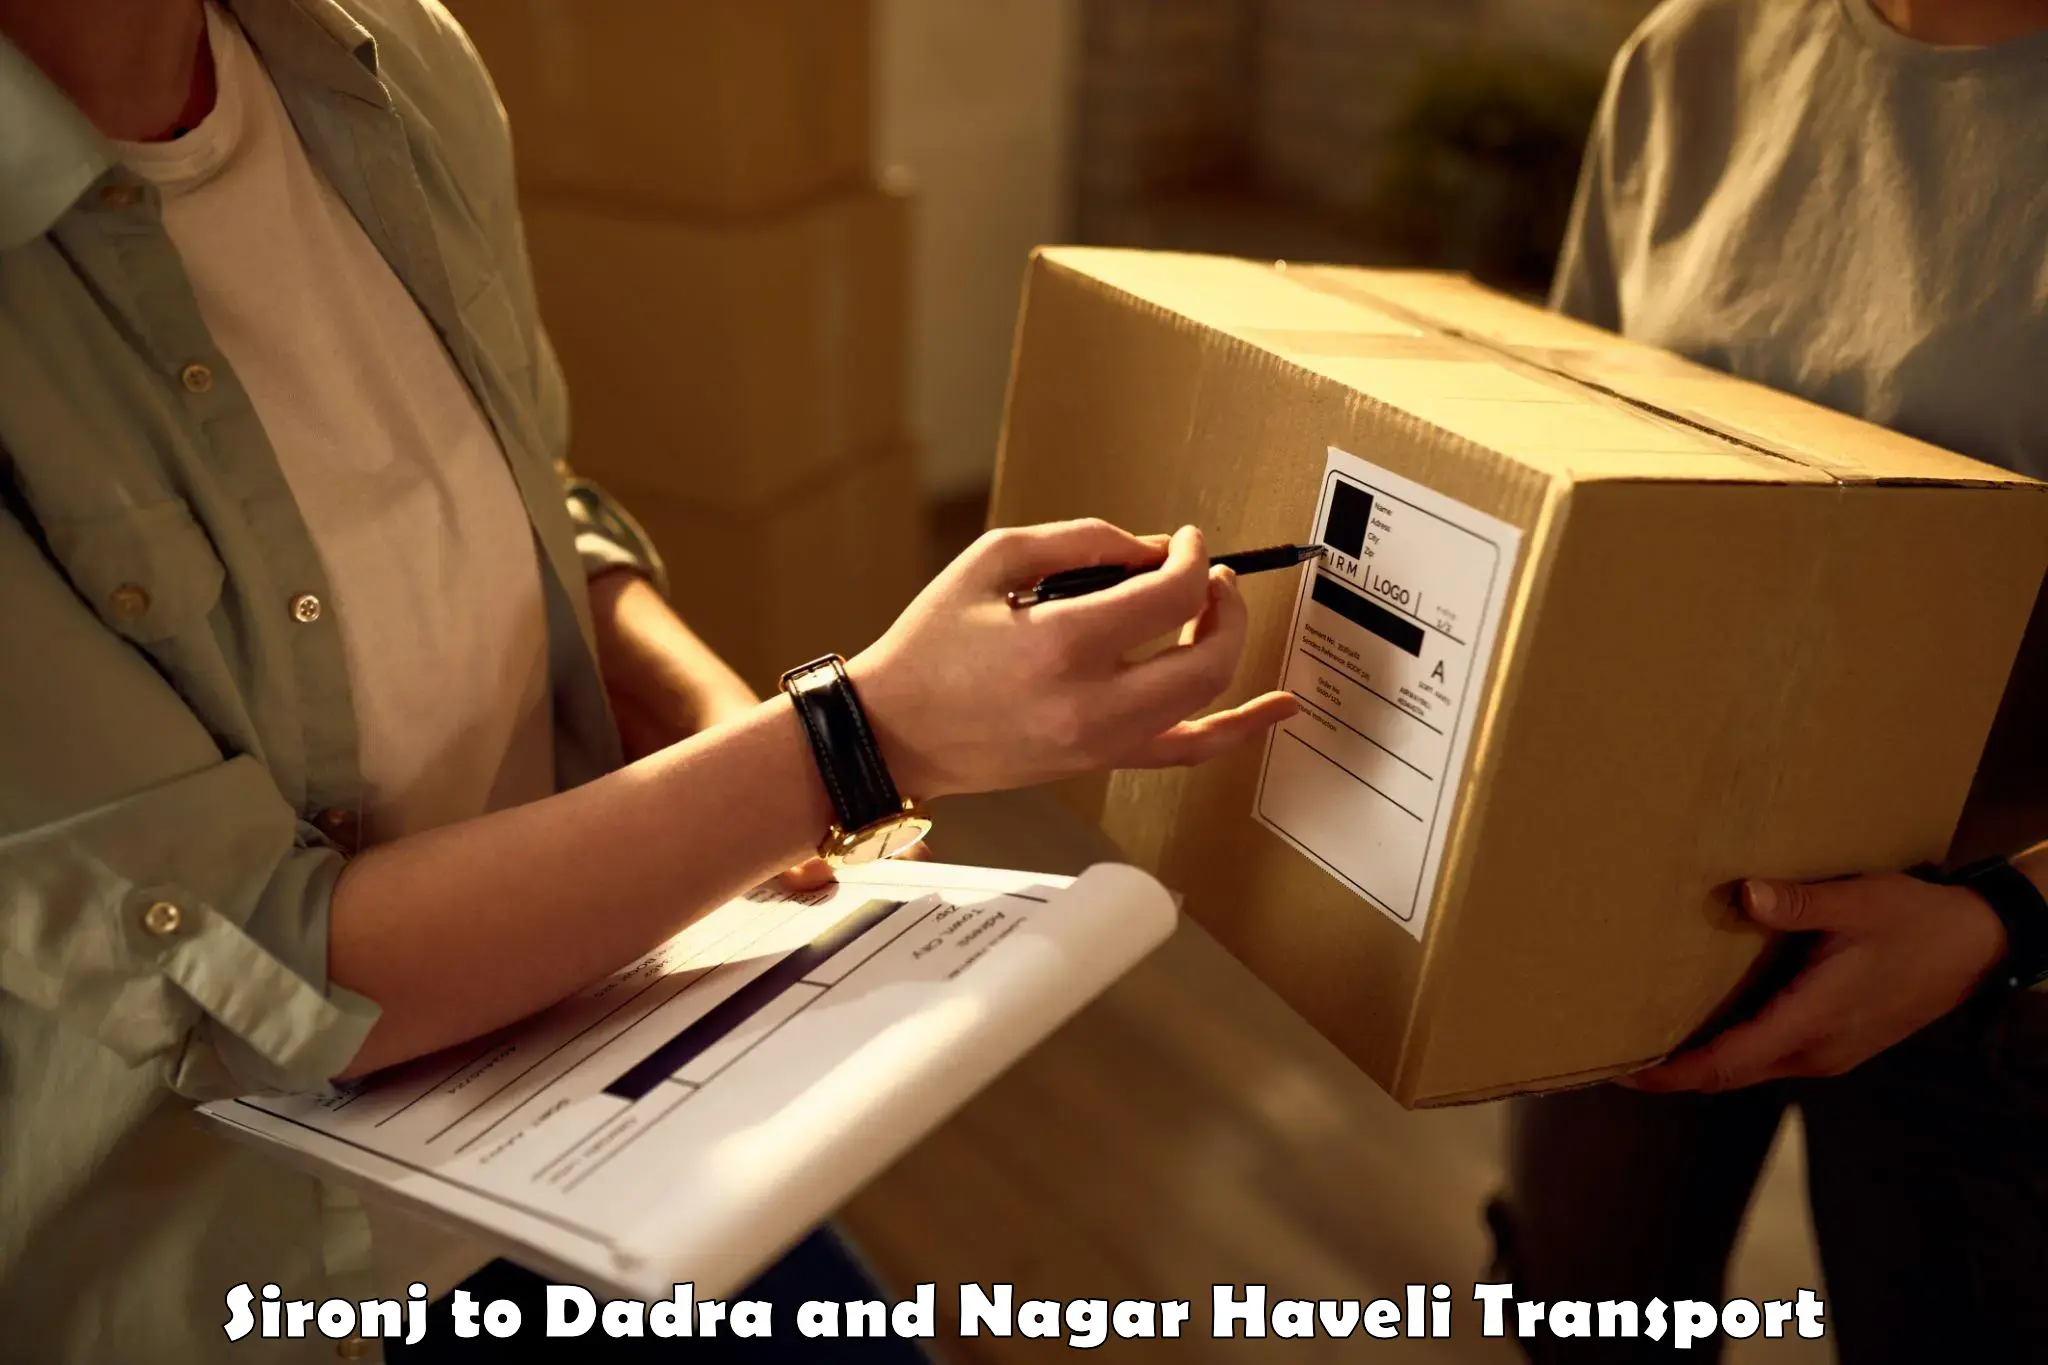 Goods delivery service Sironj to Dadra and Nagar Haveli